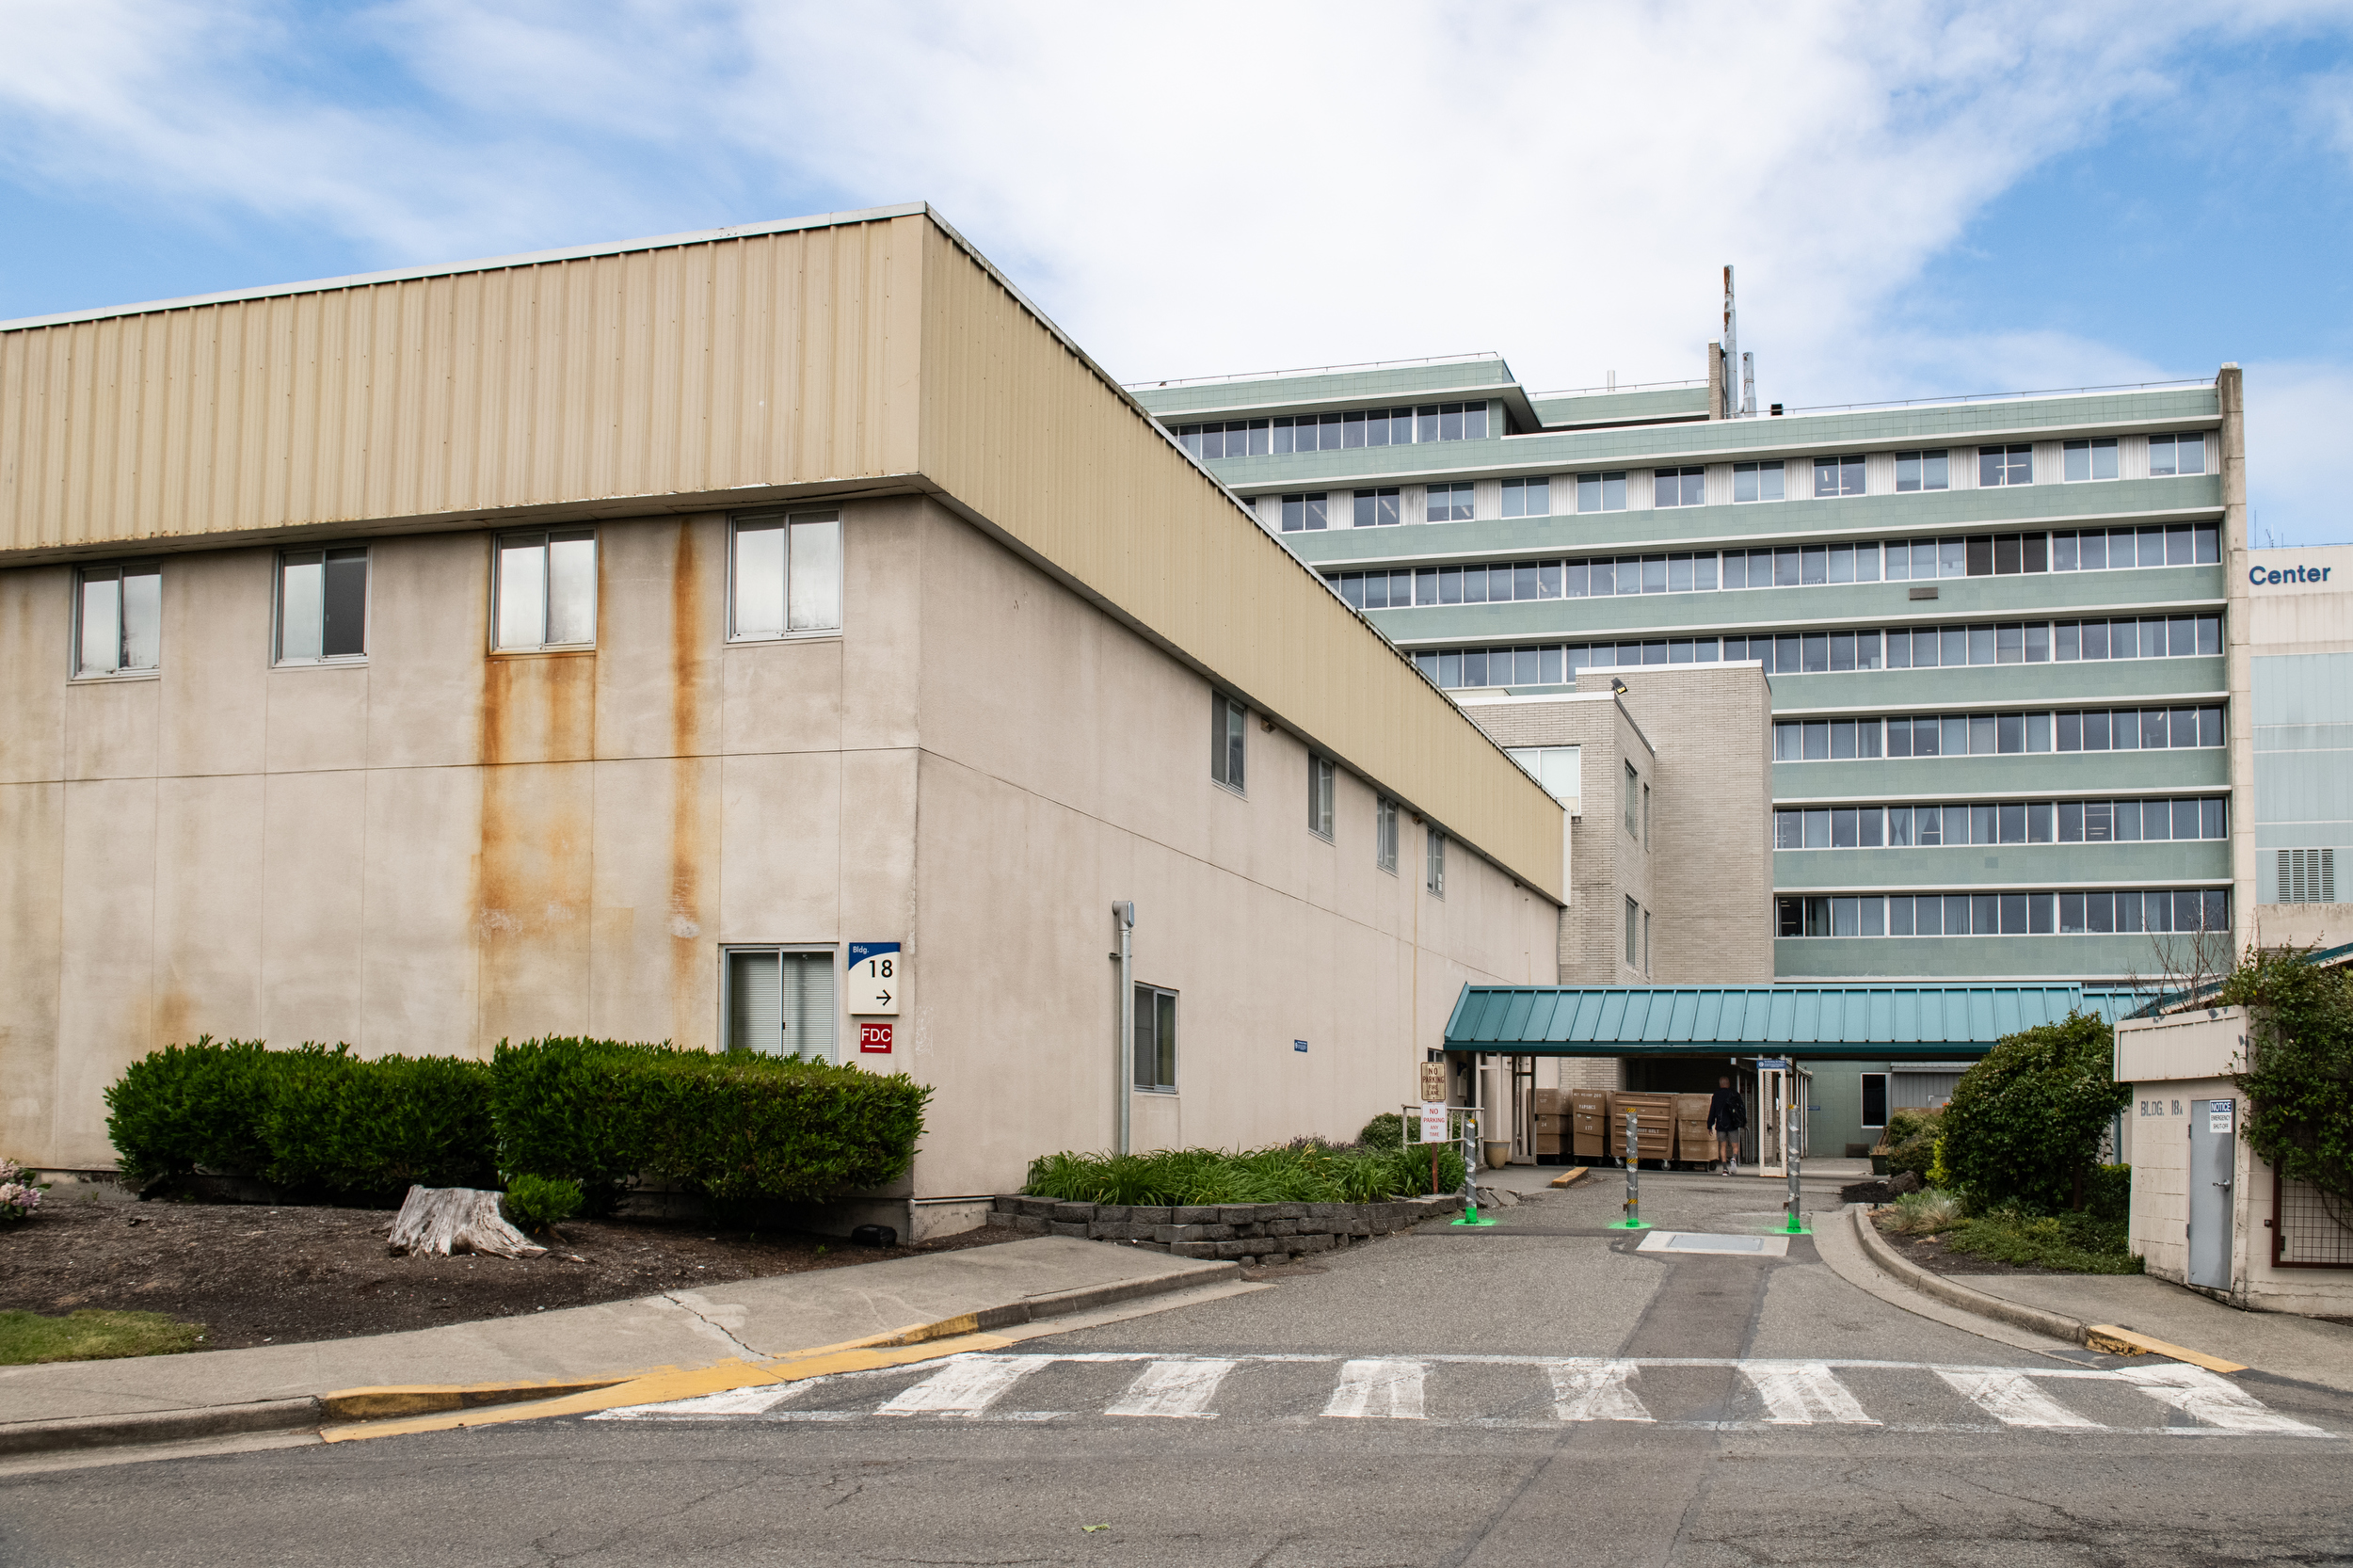 Building 18 of the VA Puget Sound campus in Beacon Hill, where documents show a failing HVAC system, resulting in substandard heat, air conditioning and air circulation, including during the COVID-19 pandemic. (Caroline Walker Evans for Cascade PBS)
